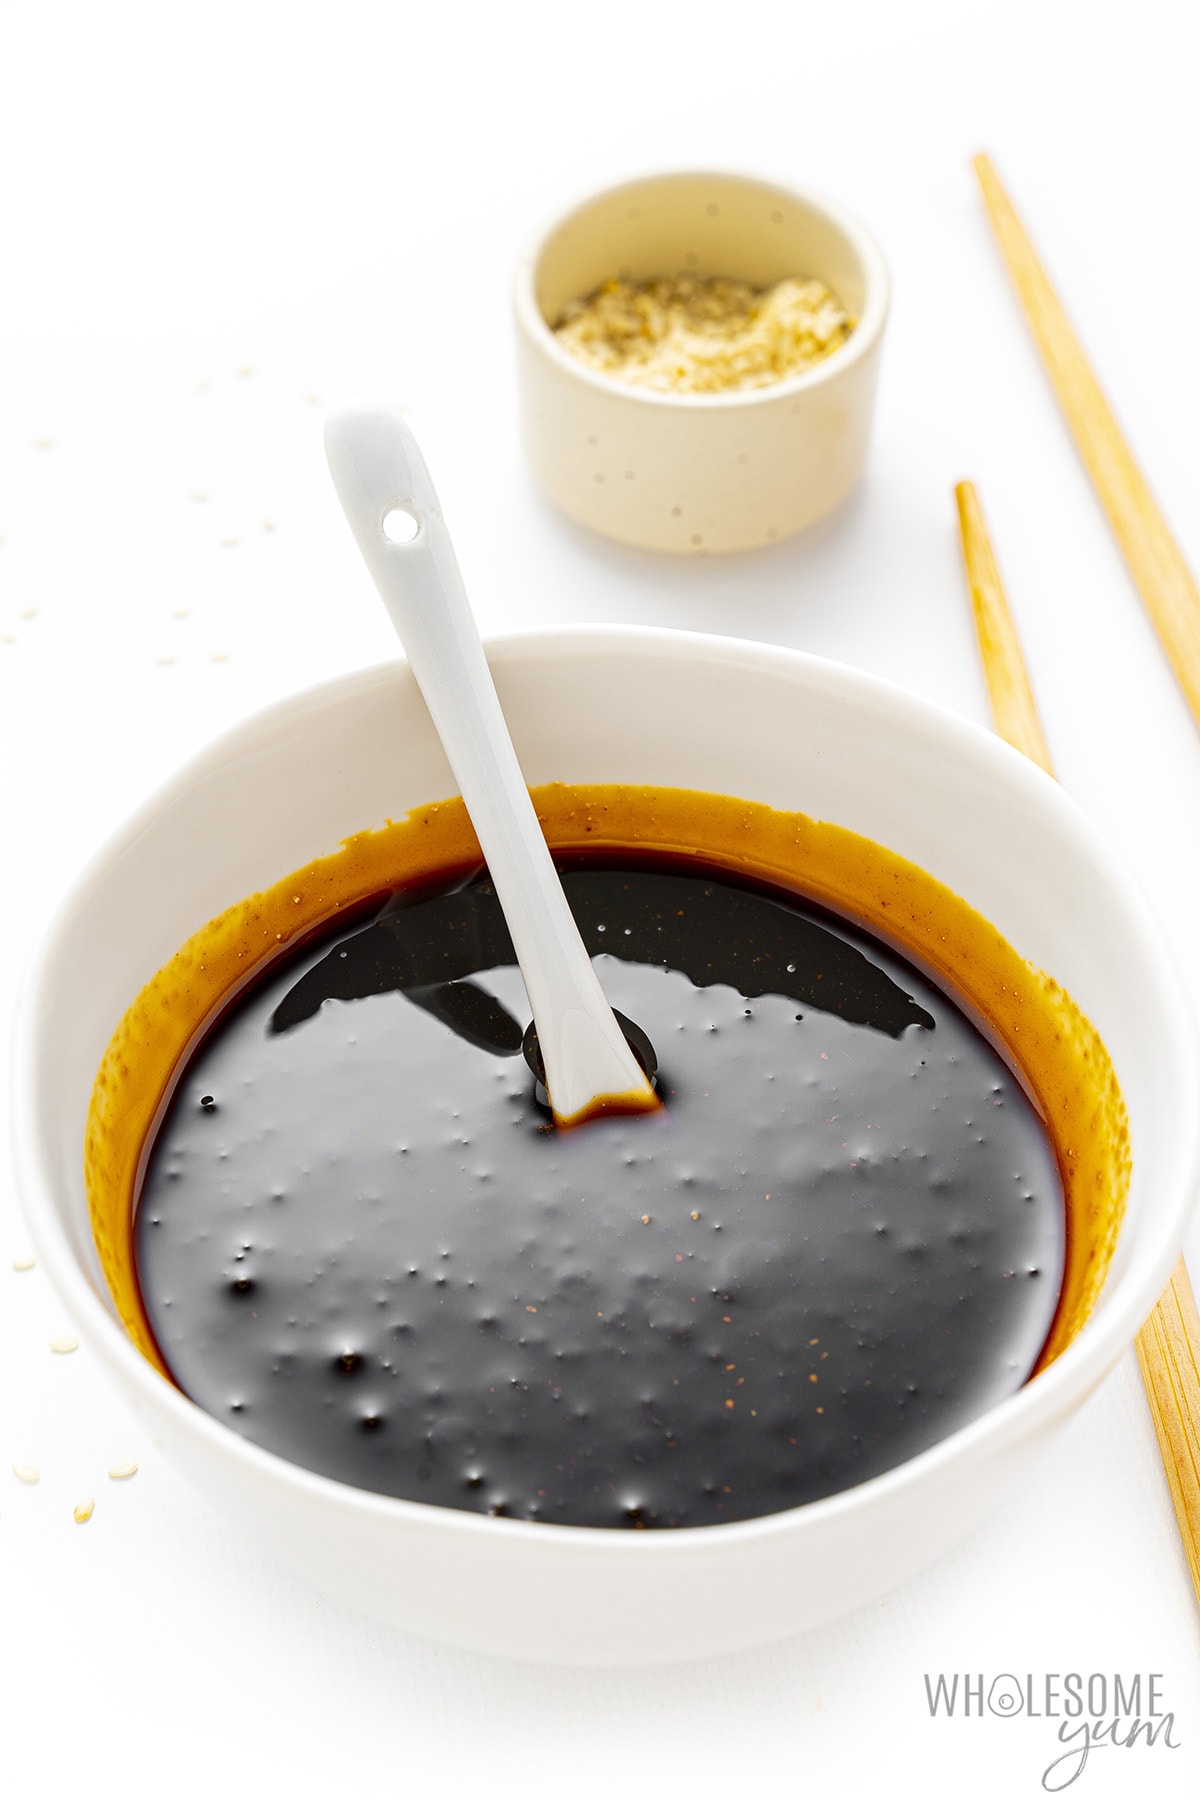 Teriyaki sauce recipe in a bowl with a spoon.